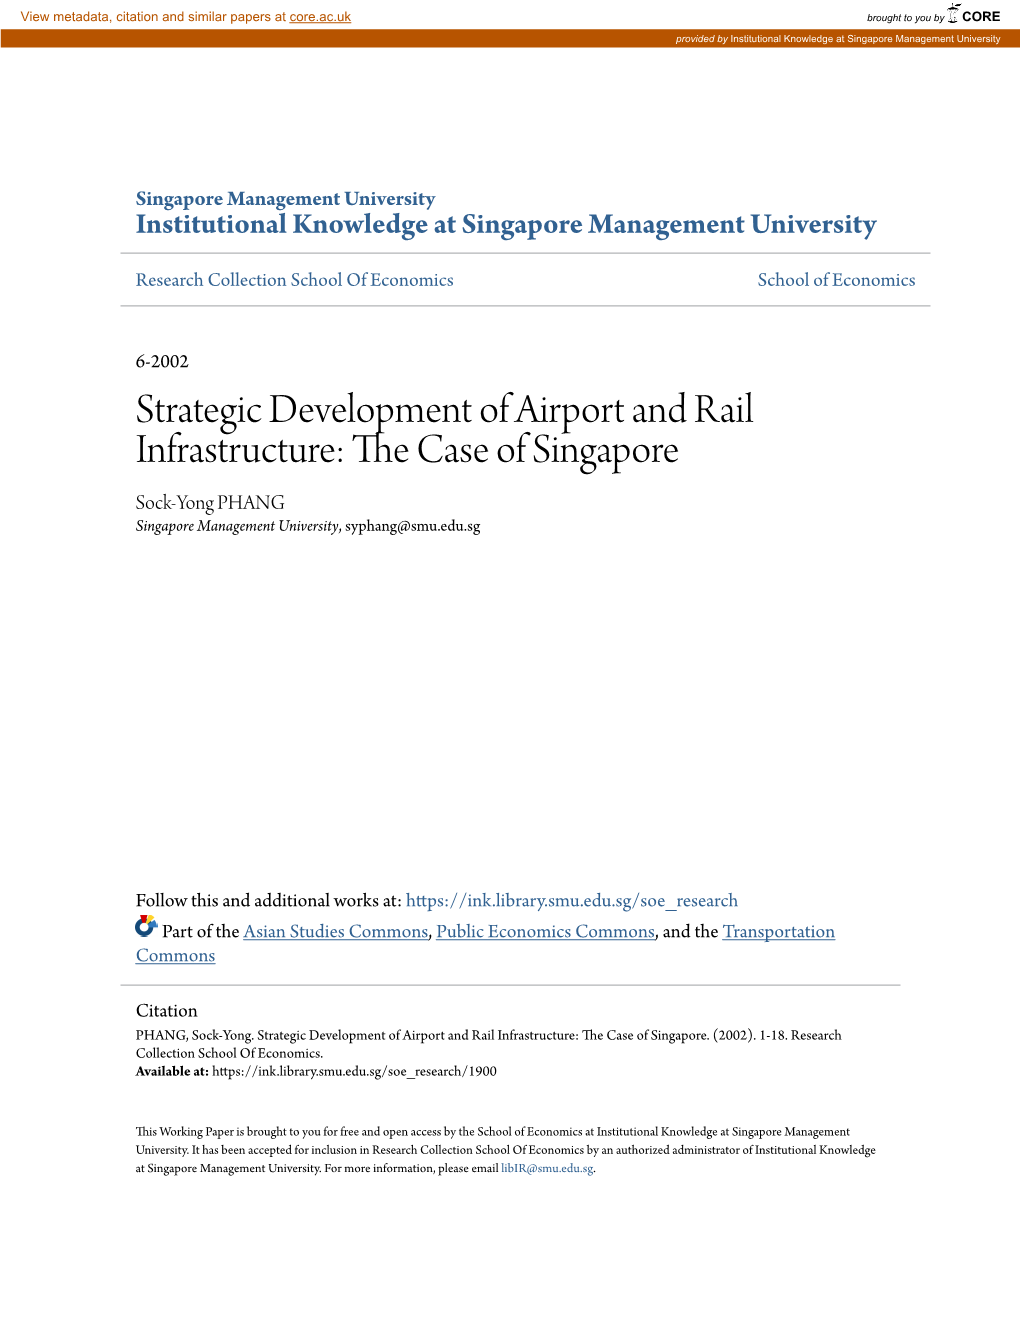 Strategic Development of Airport and Rail Infrastructure: the Ac Se of Singapore Sock-Yong PHANG Singapore Management University, Syphang@Smu.Edu.Sg